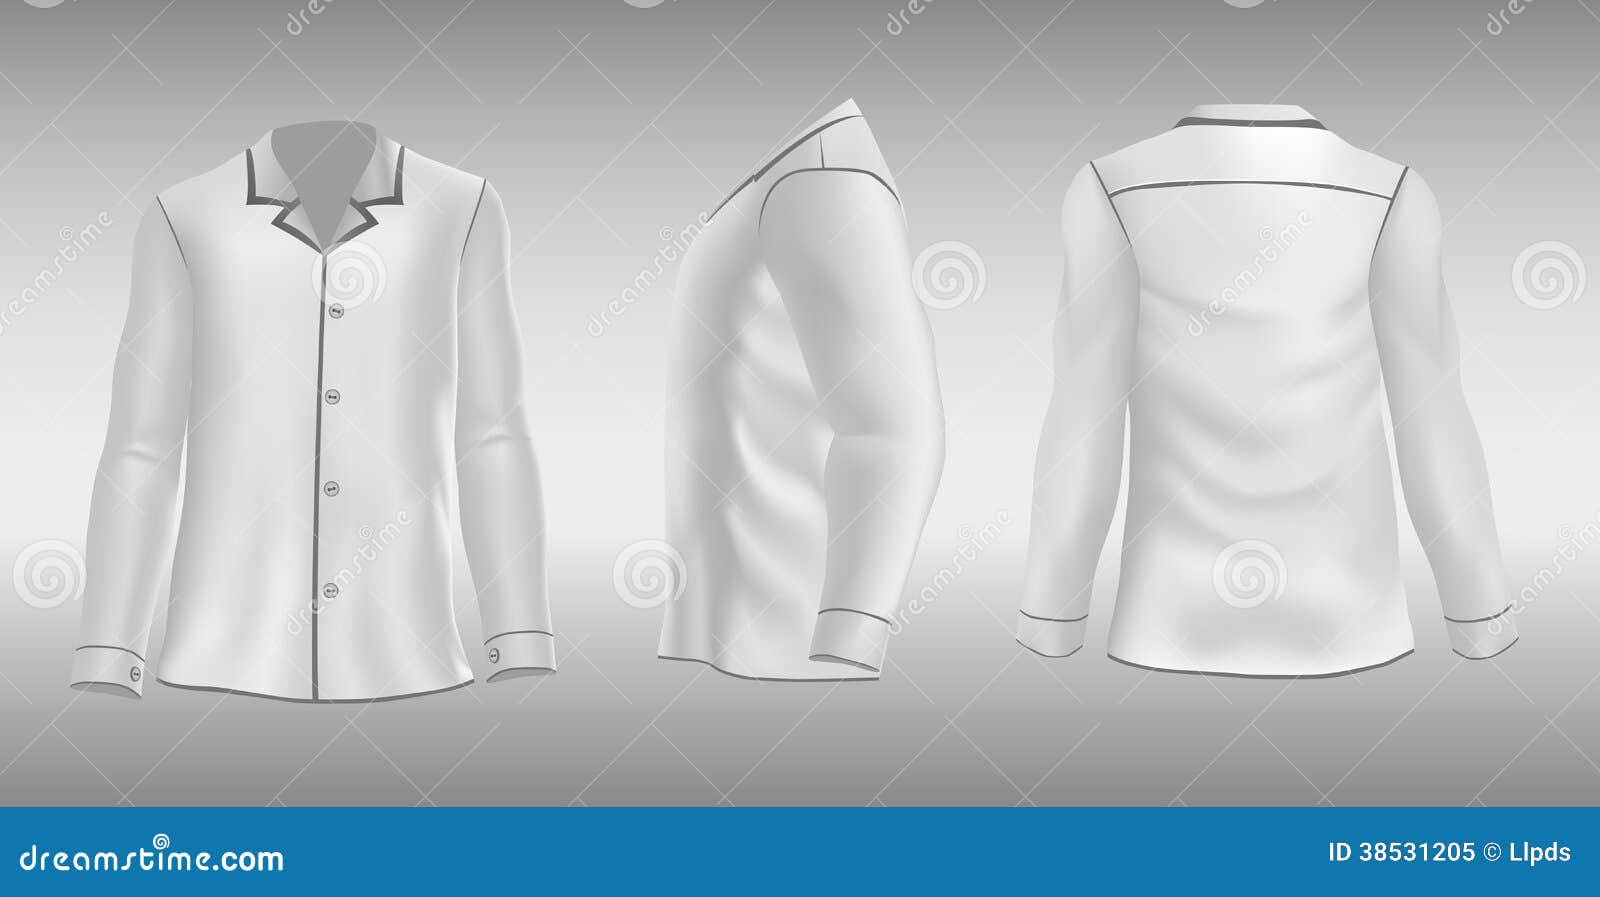 Download T-shirt With Sleeves And Collar Stock Vector ...